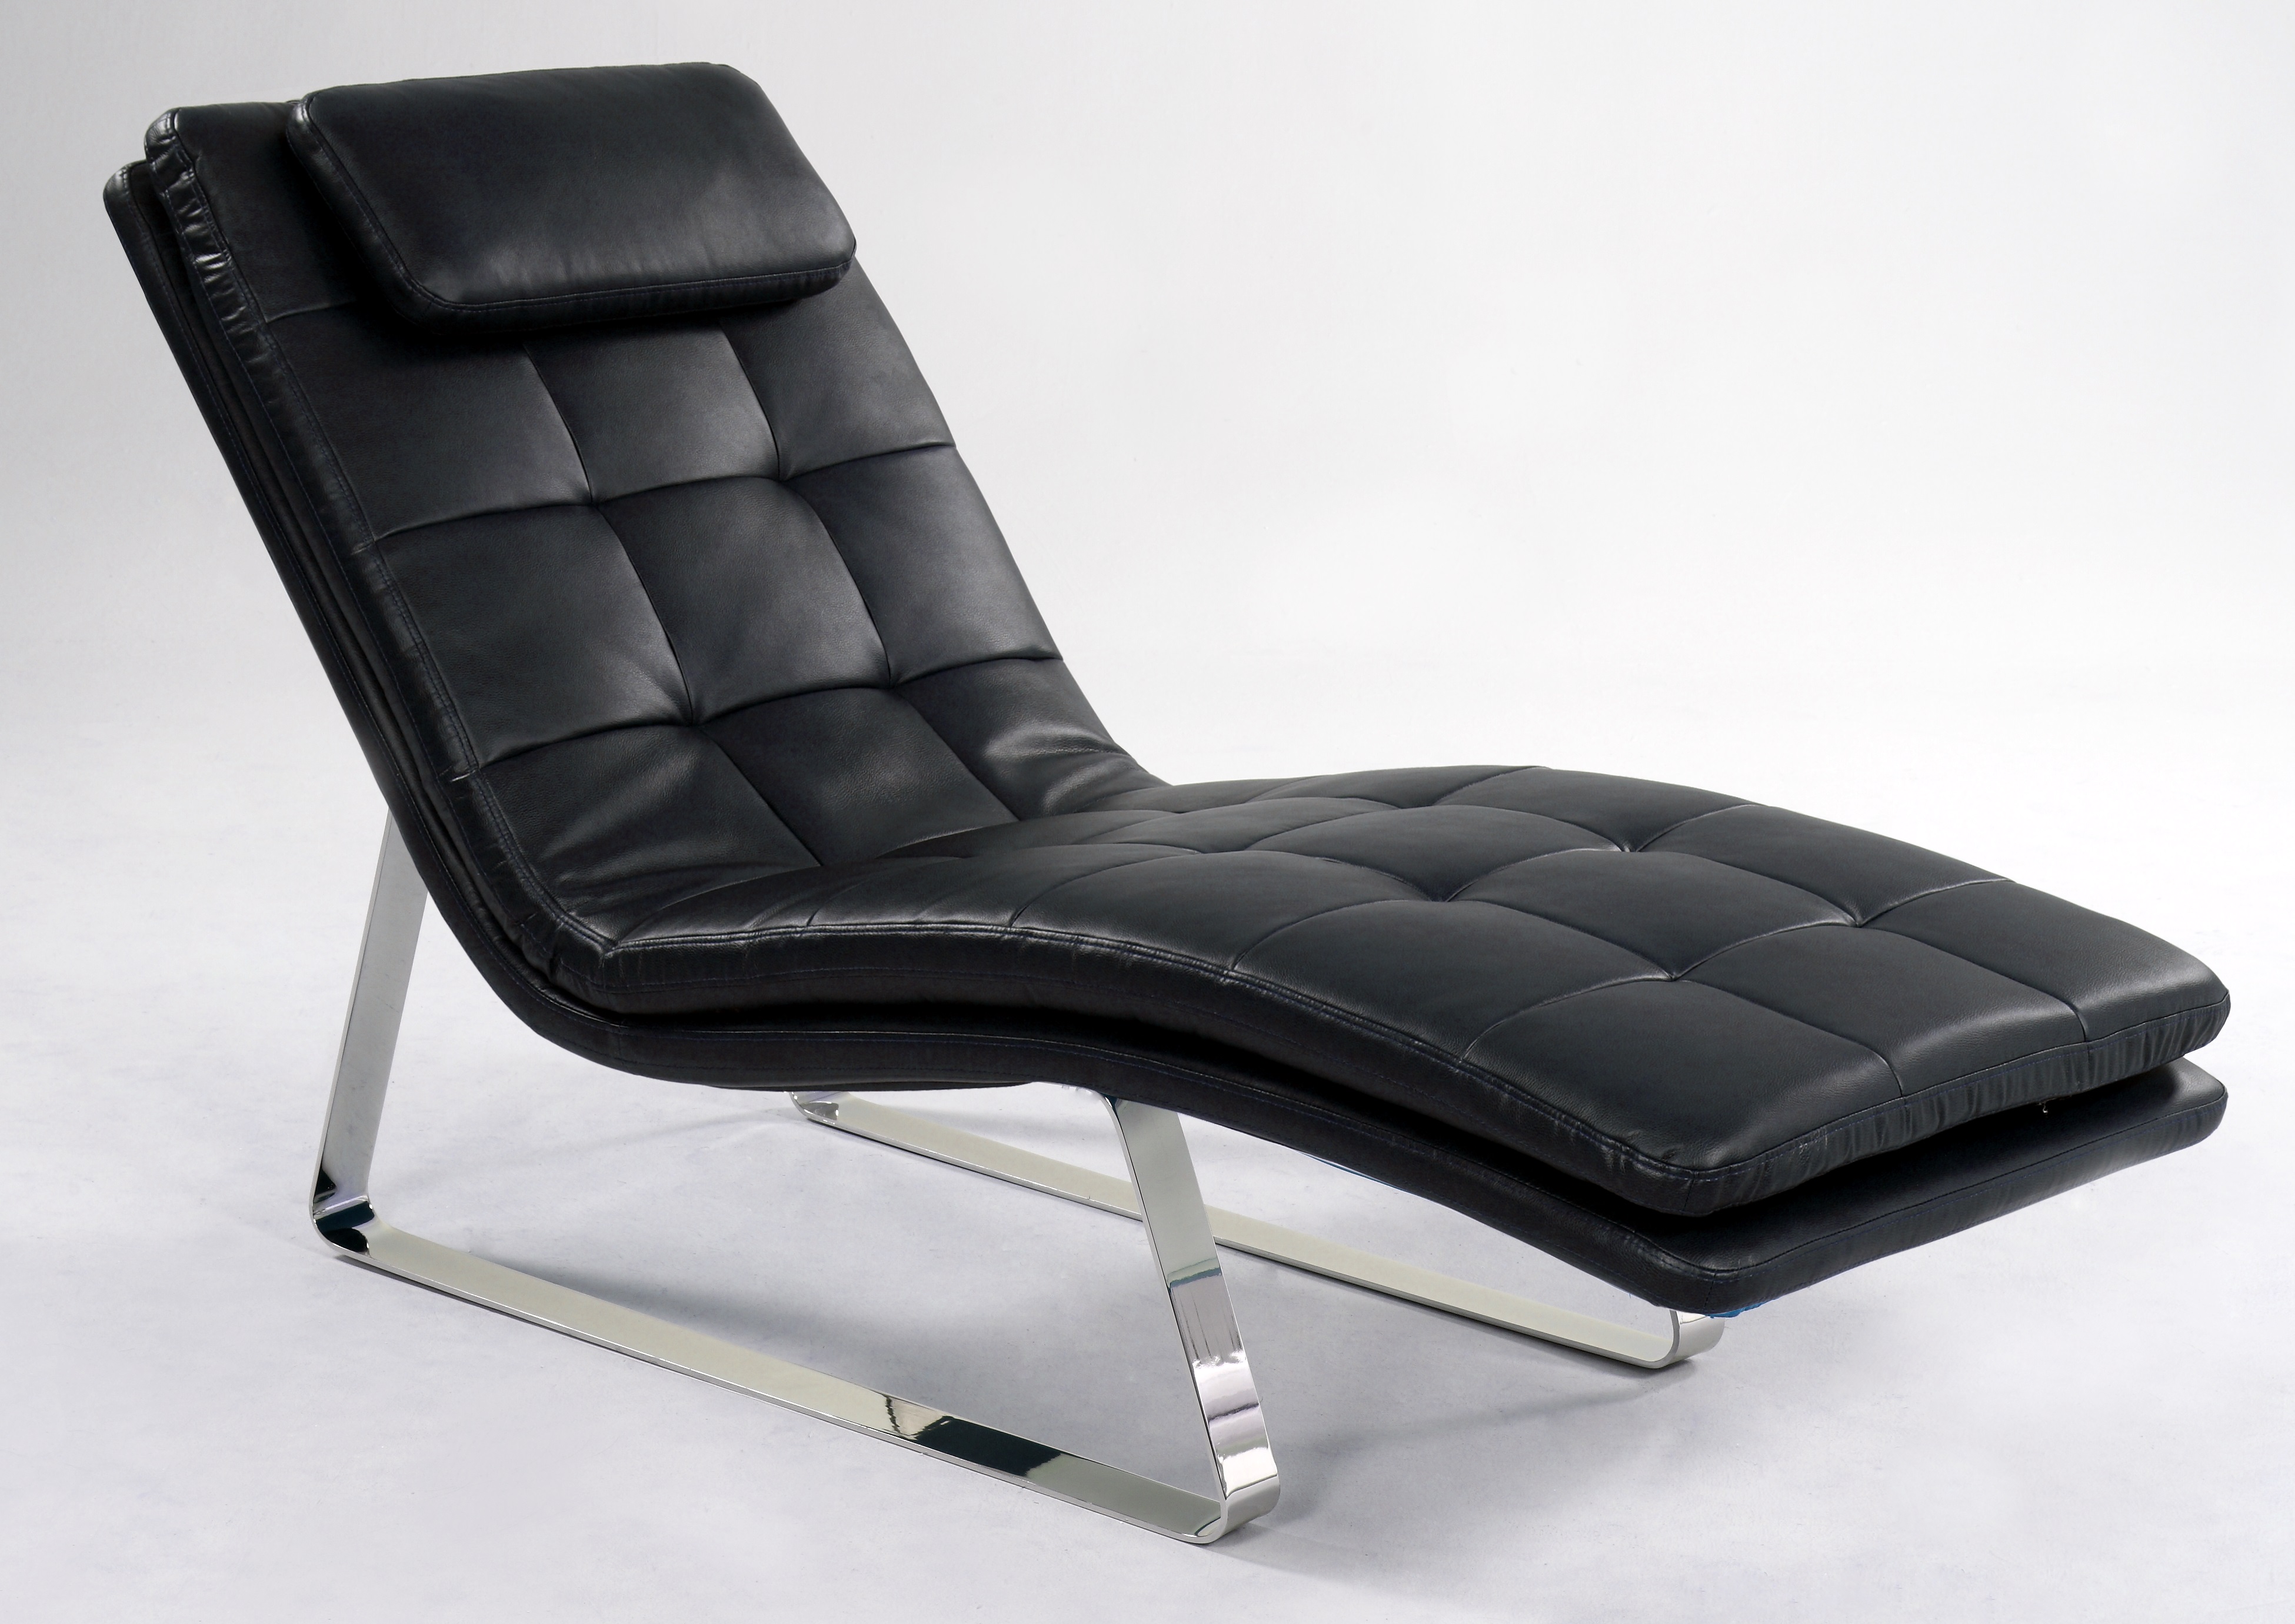 Full Bonded Leather Tufted Chaise Lounge With Chrome Legs - Click Image to Close